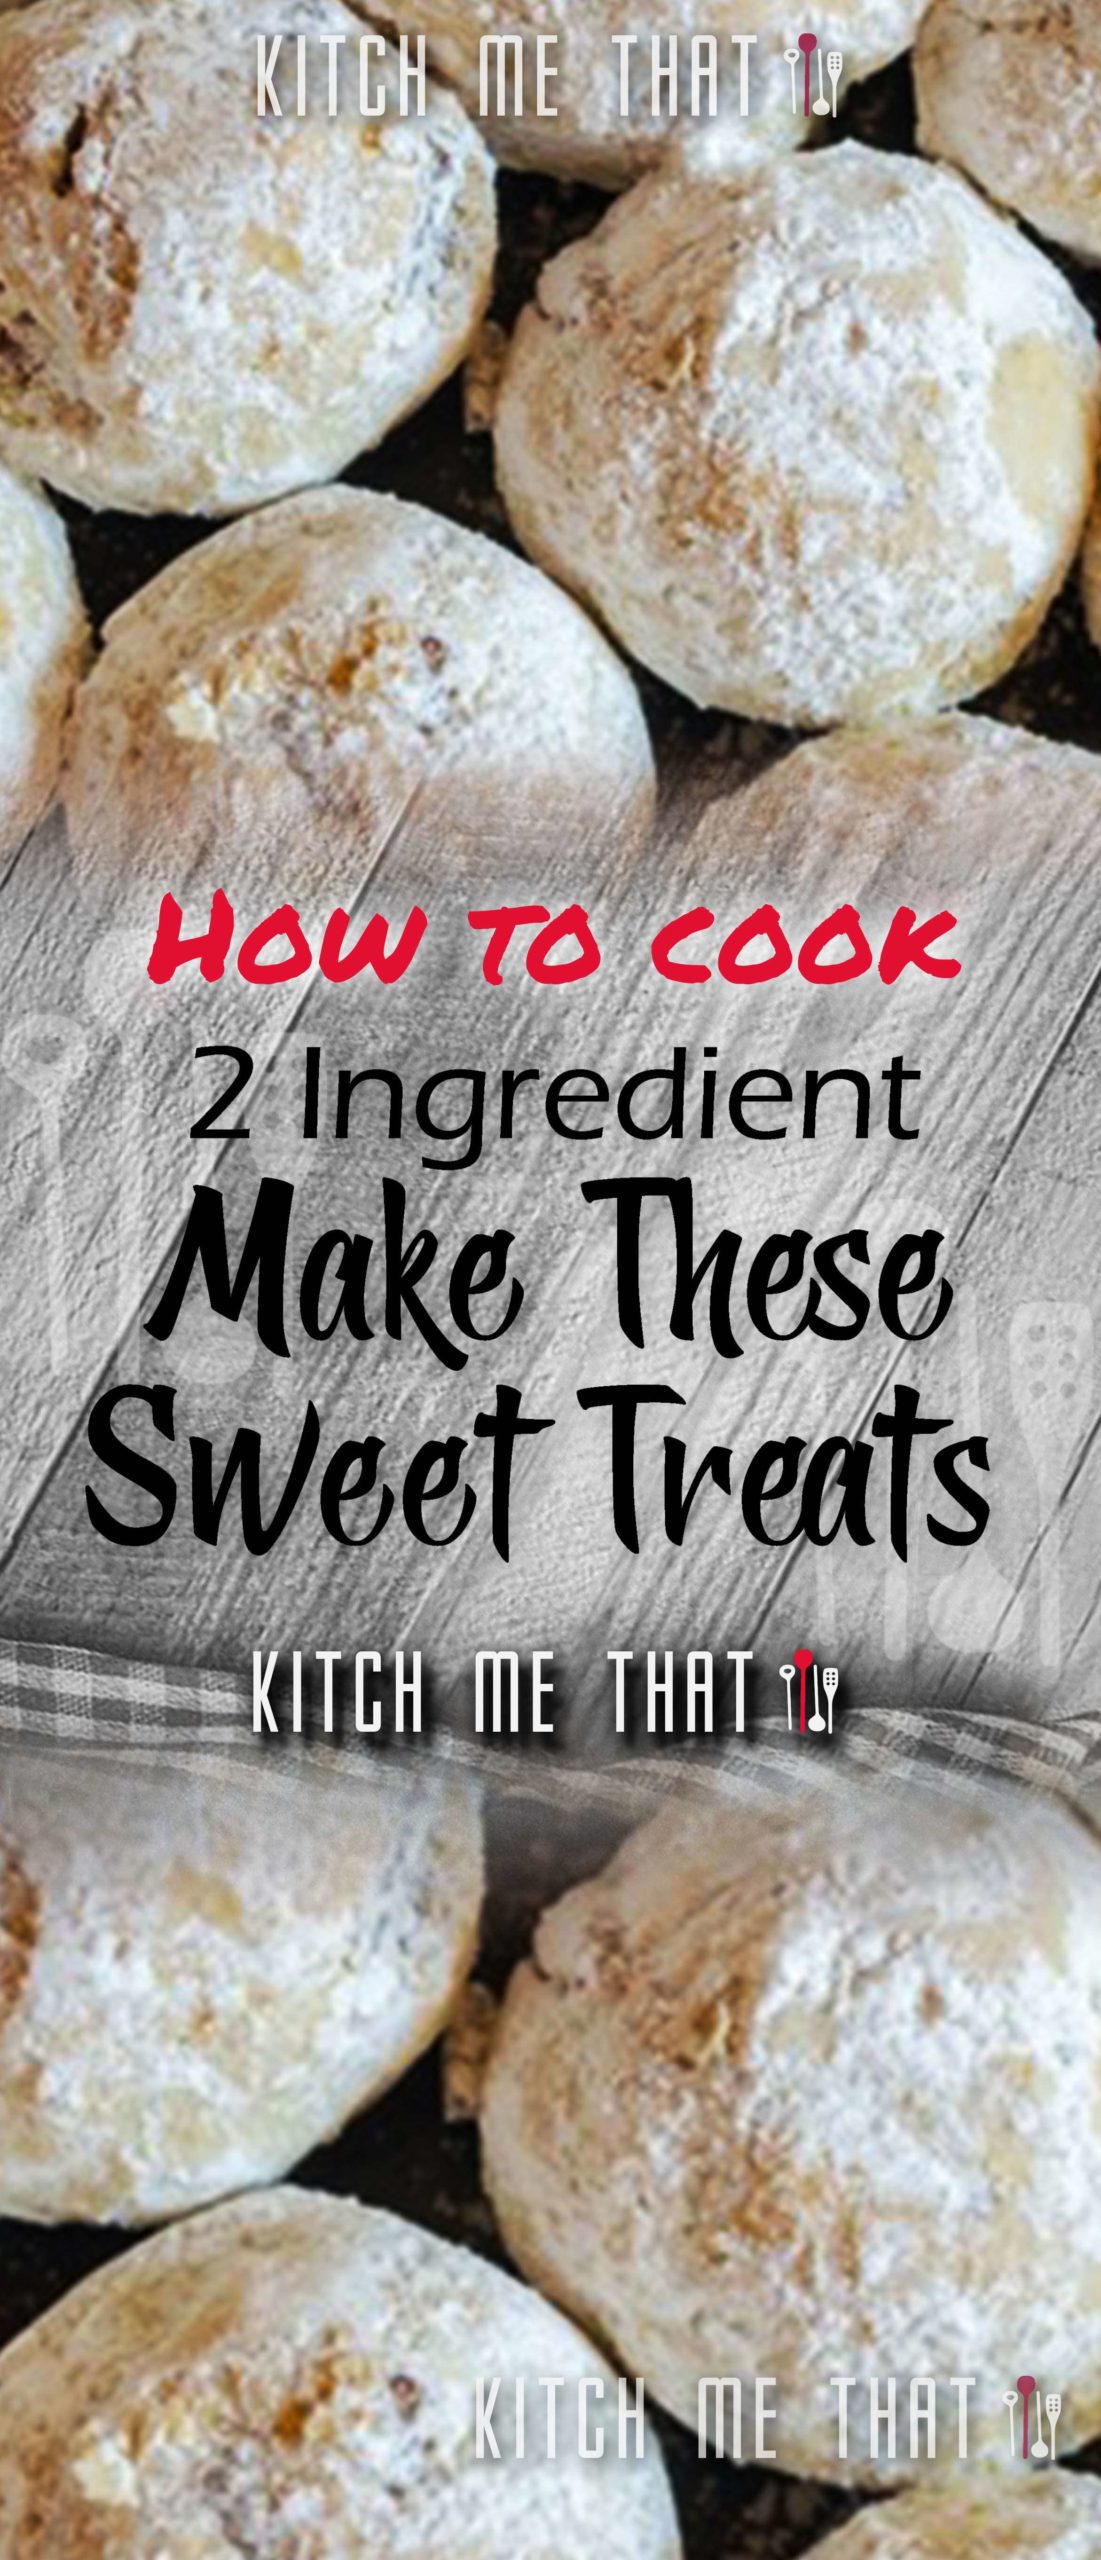 Only A Few Simple Ingredients To Make These Sweet Little Treats